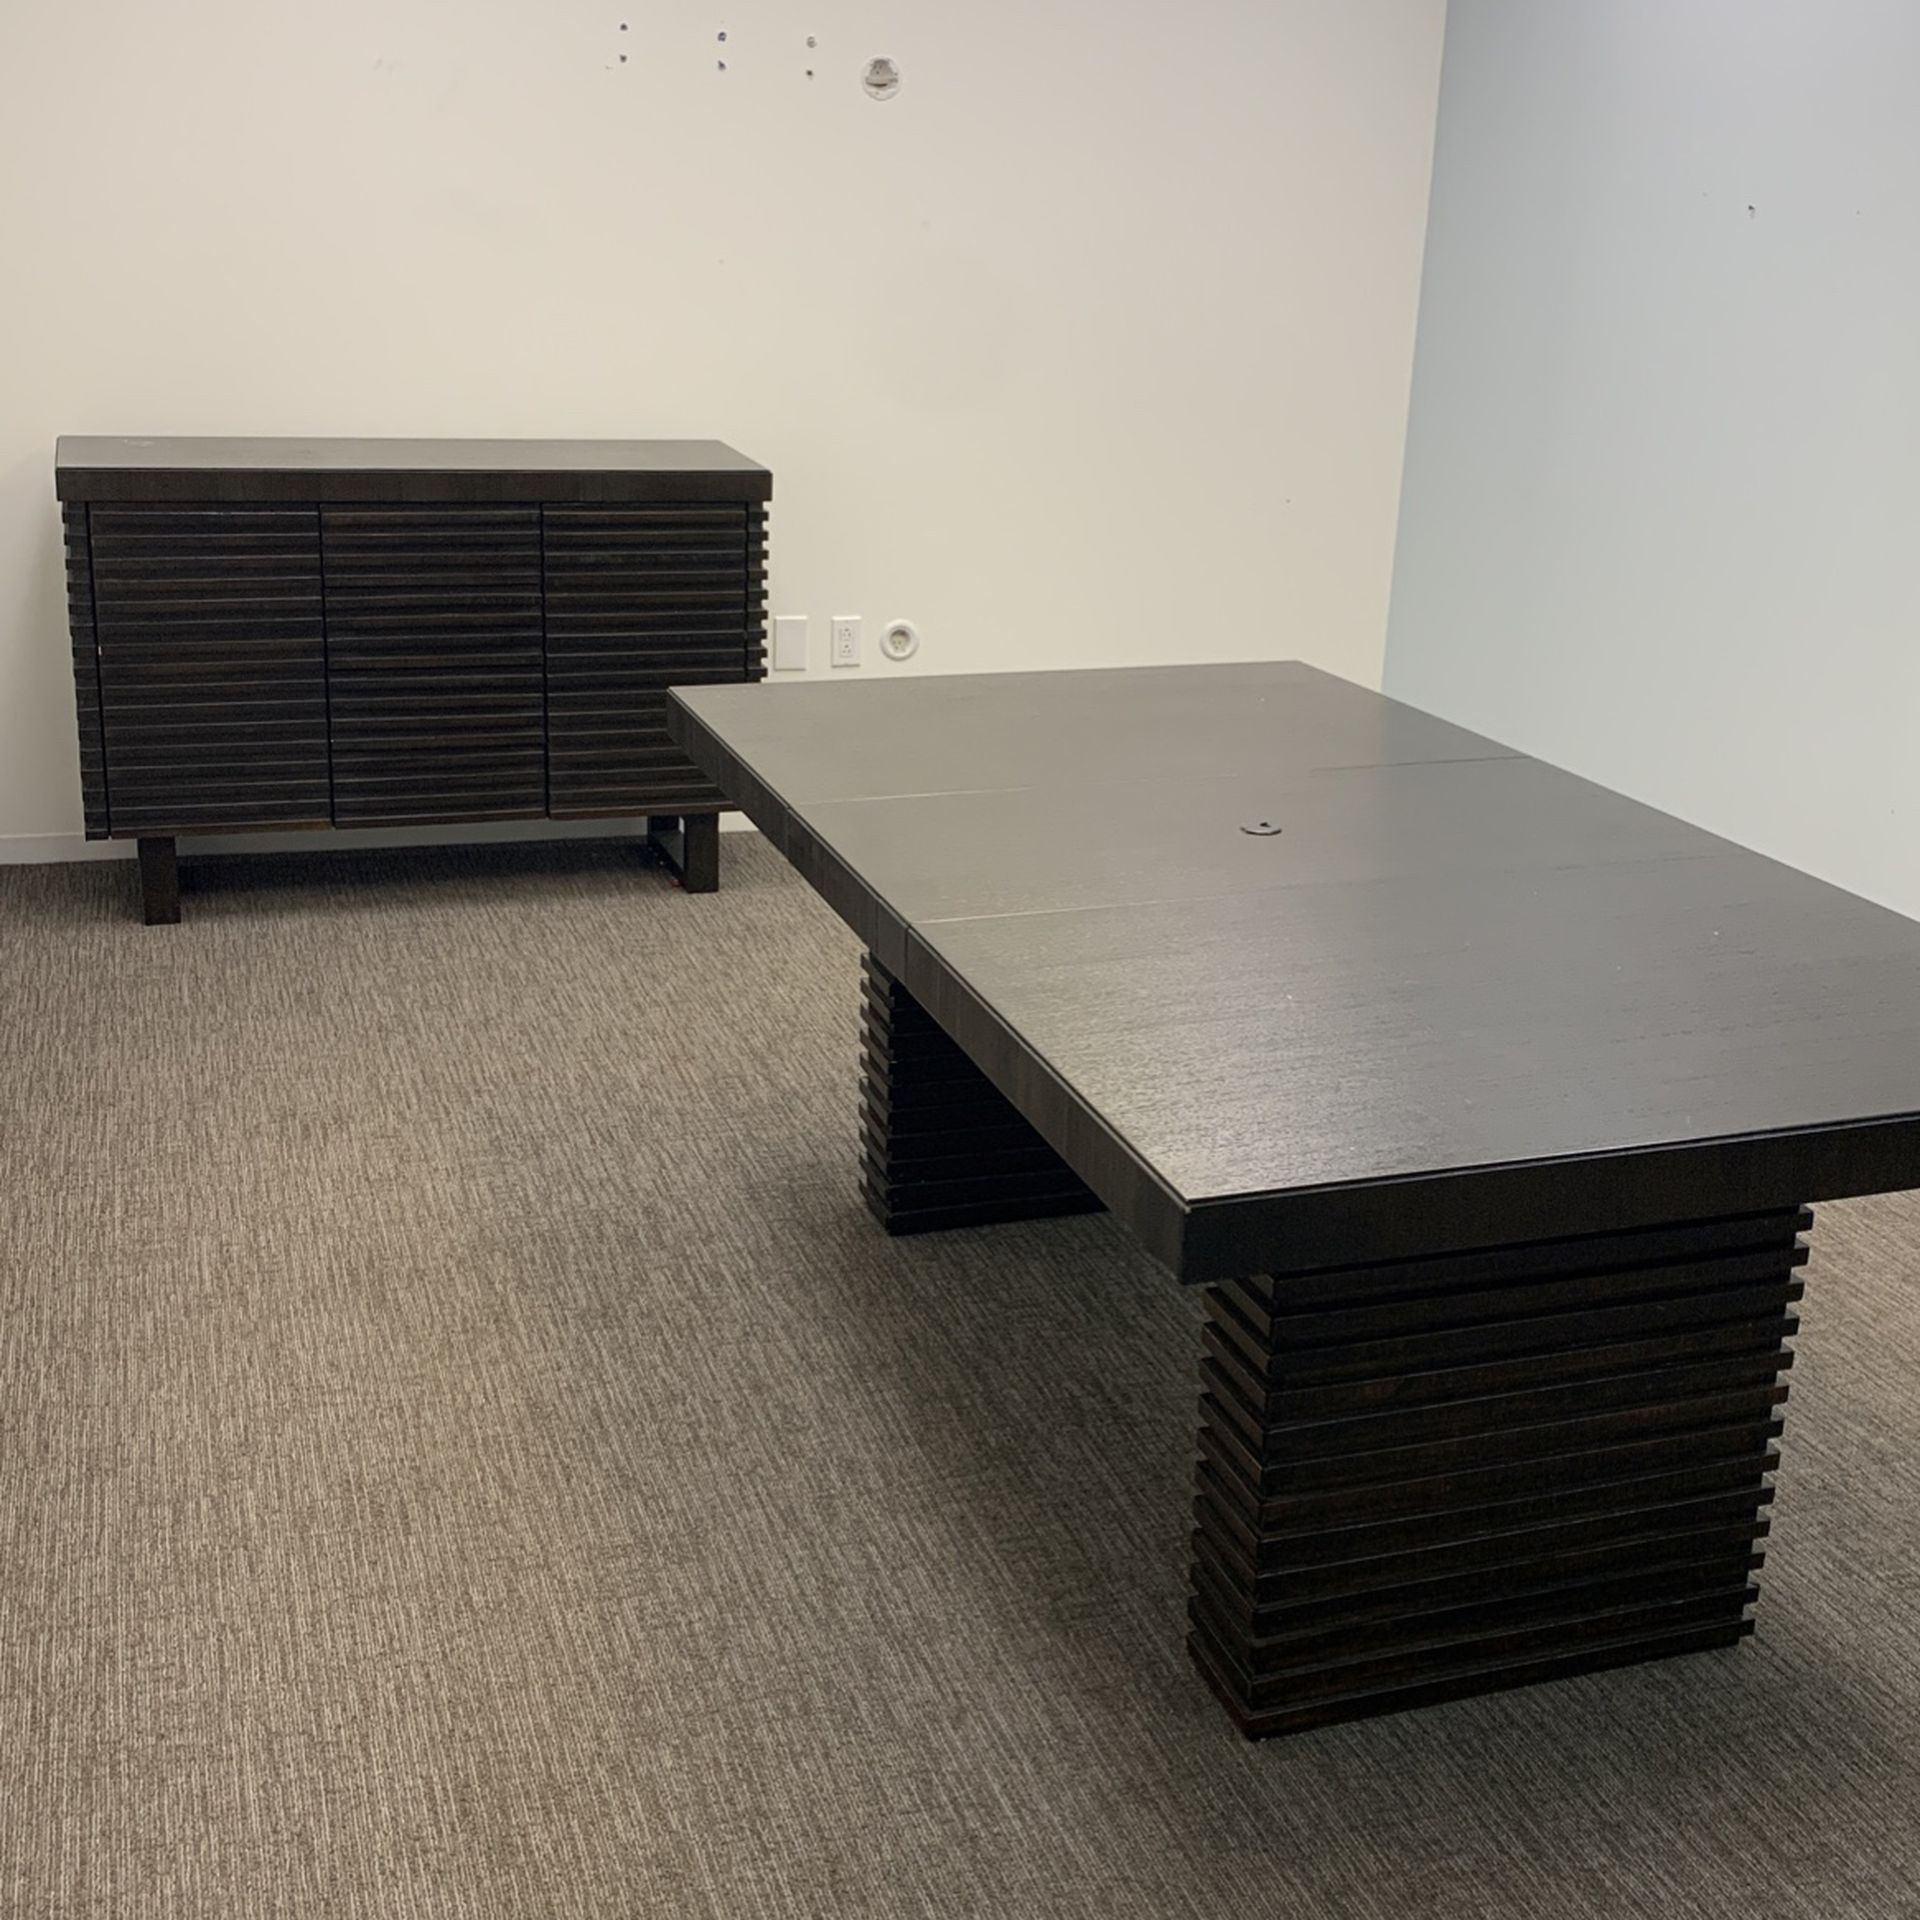 Matching Table with Credenza (set)